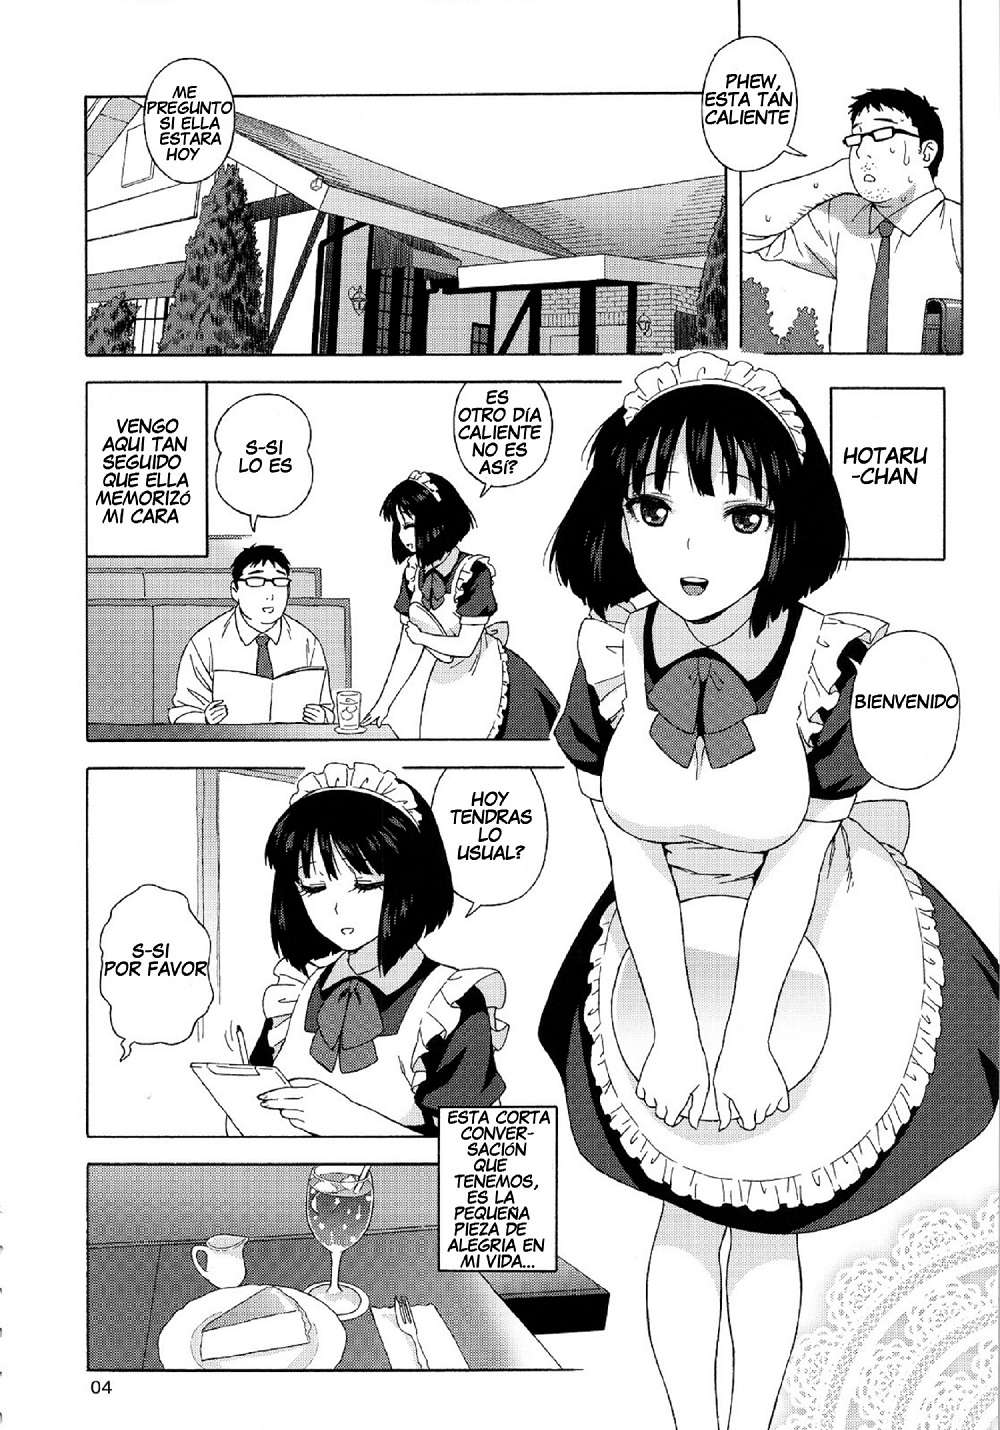 A Method to Marry Hotaru-chan the JK Chapter-1 - 2